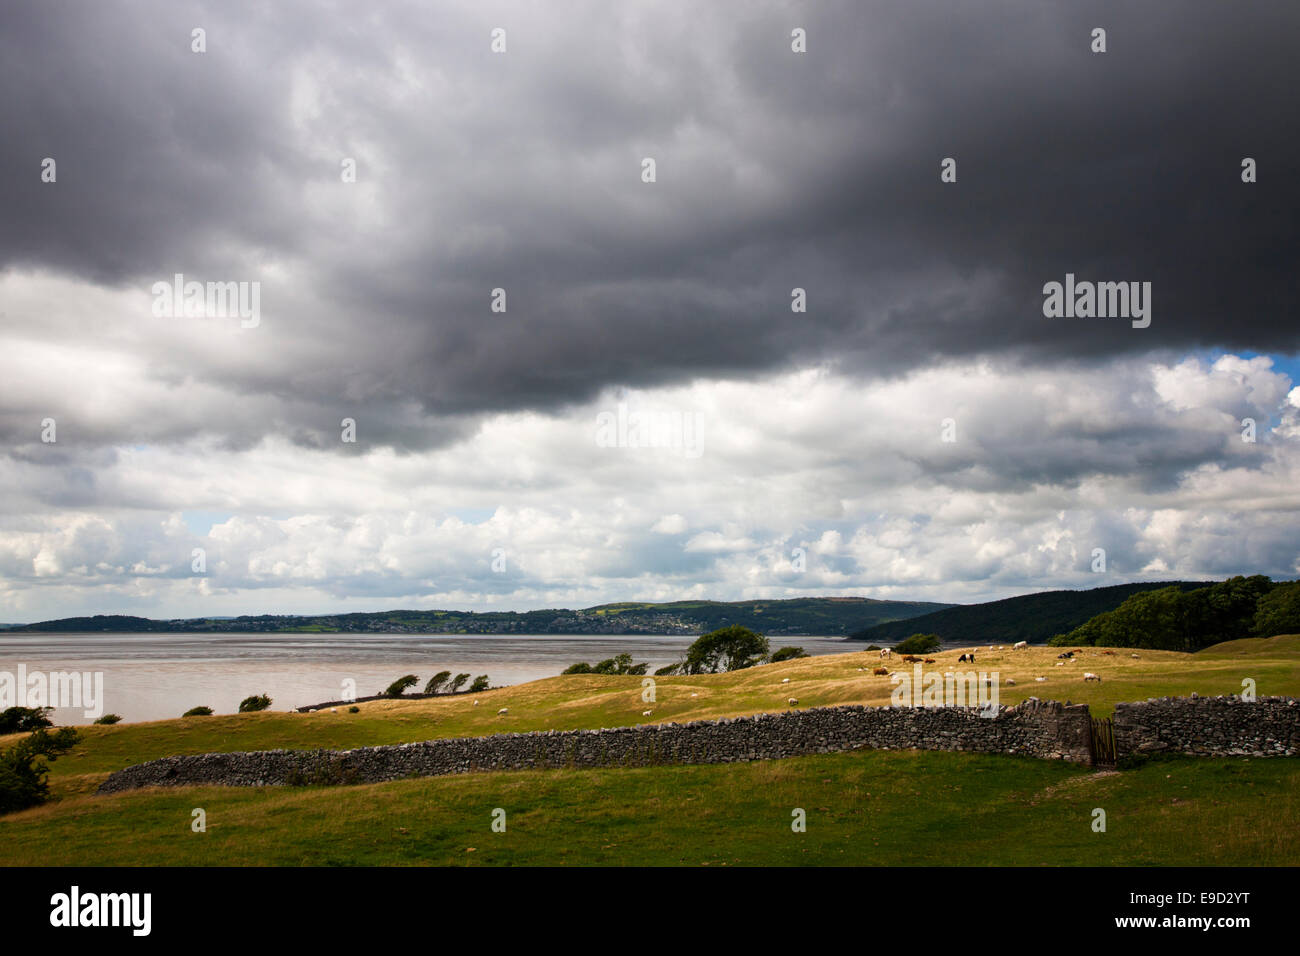 Storm clouds over Silverdale in Cumbria Stock Photo